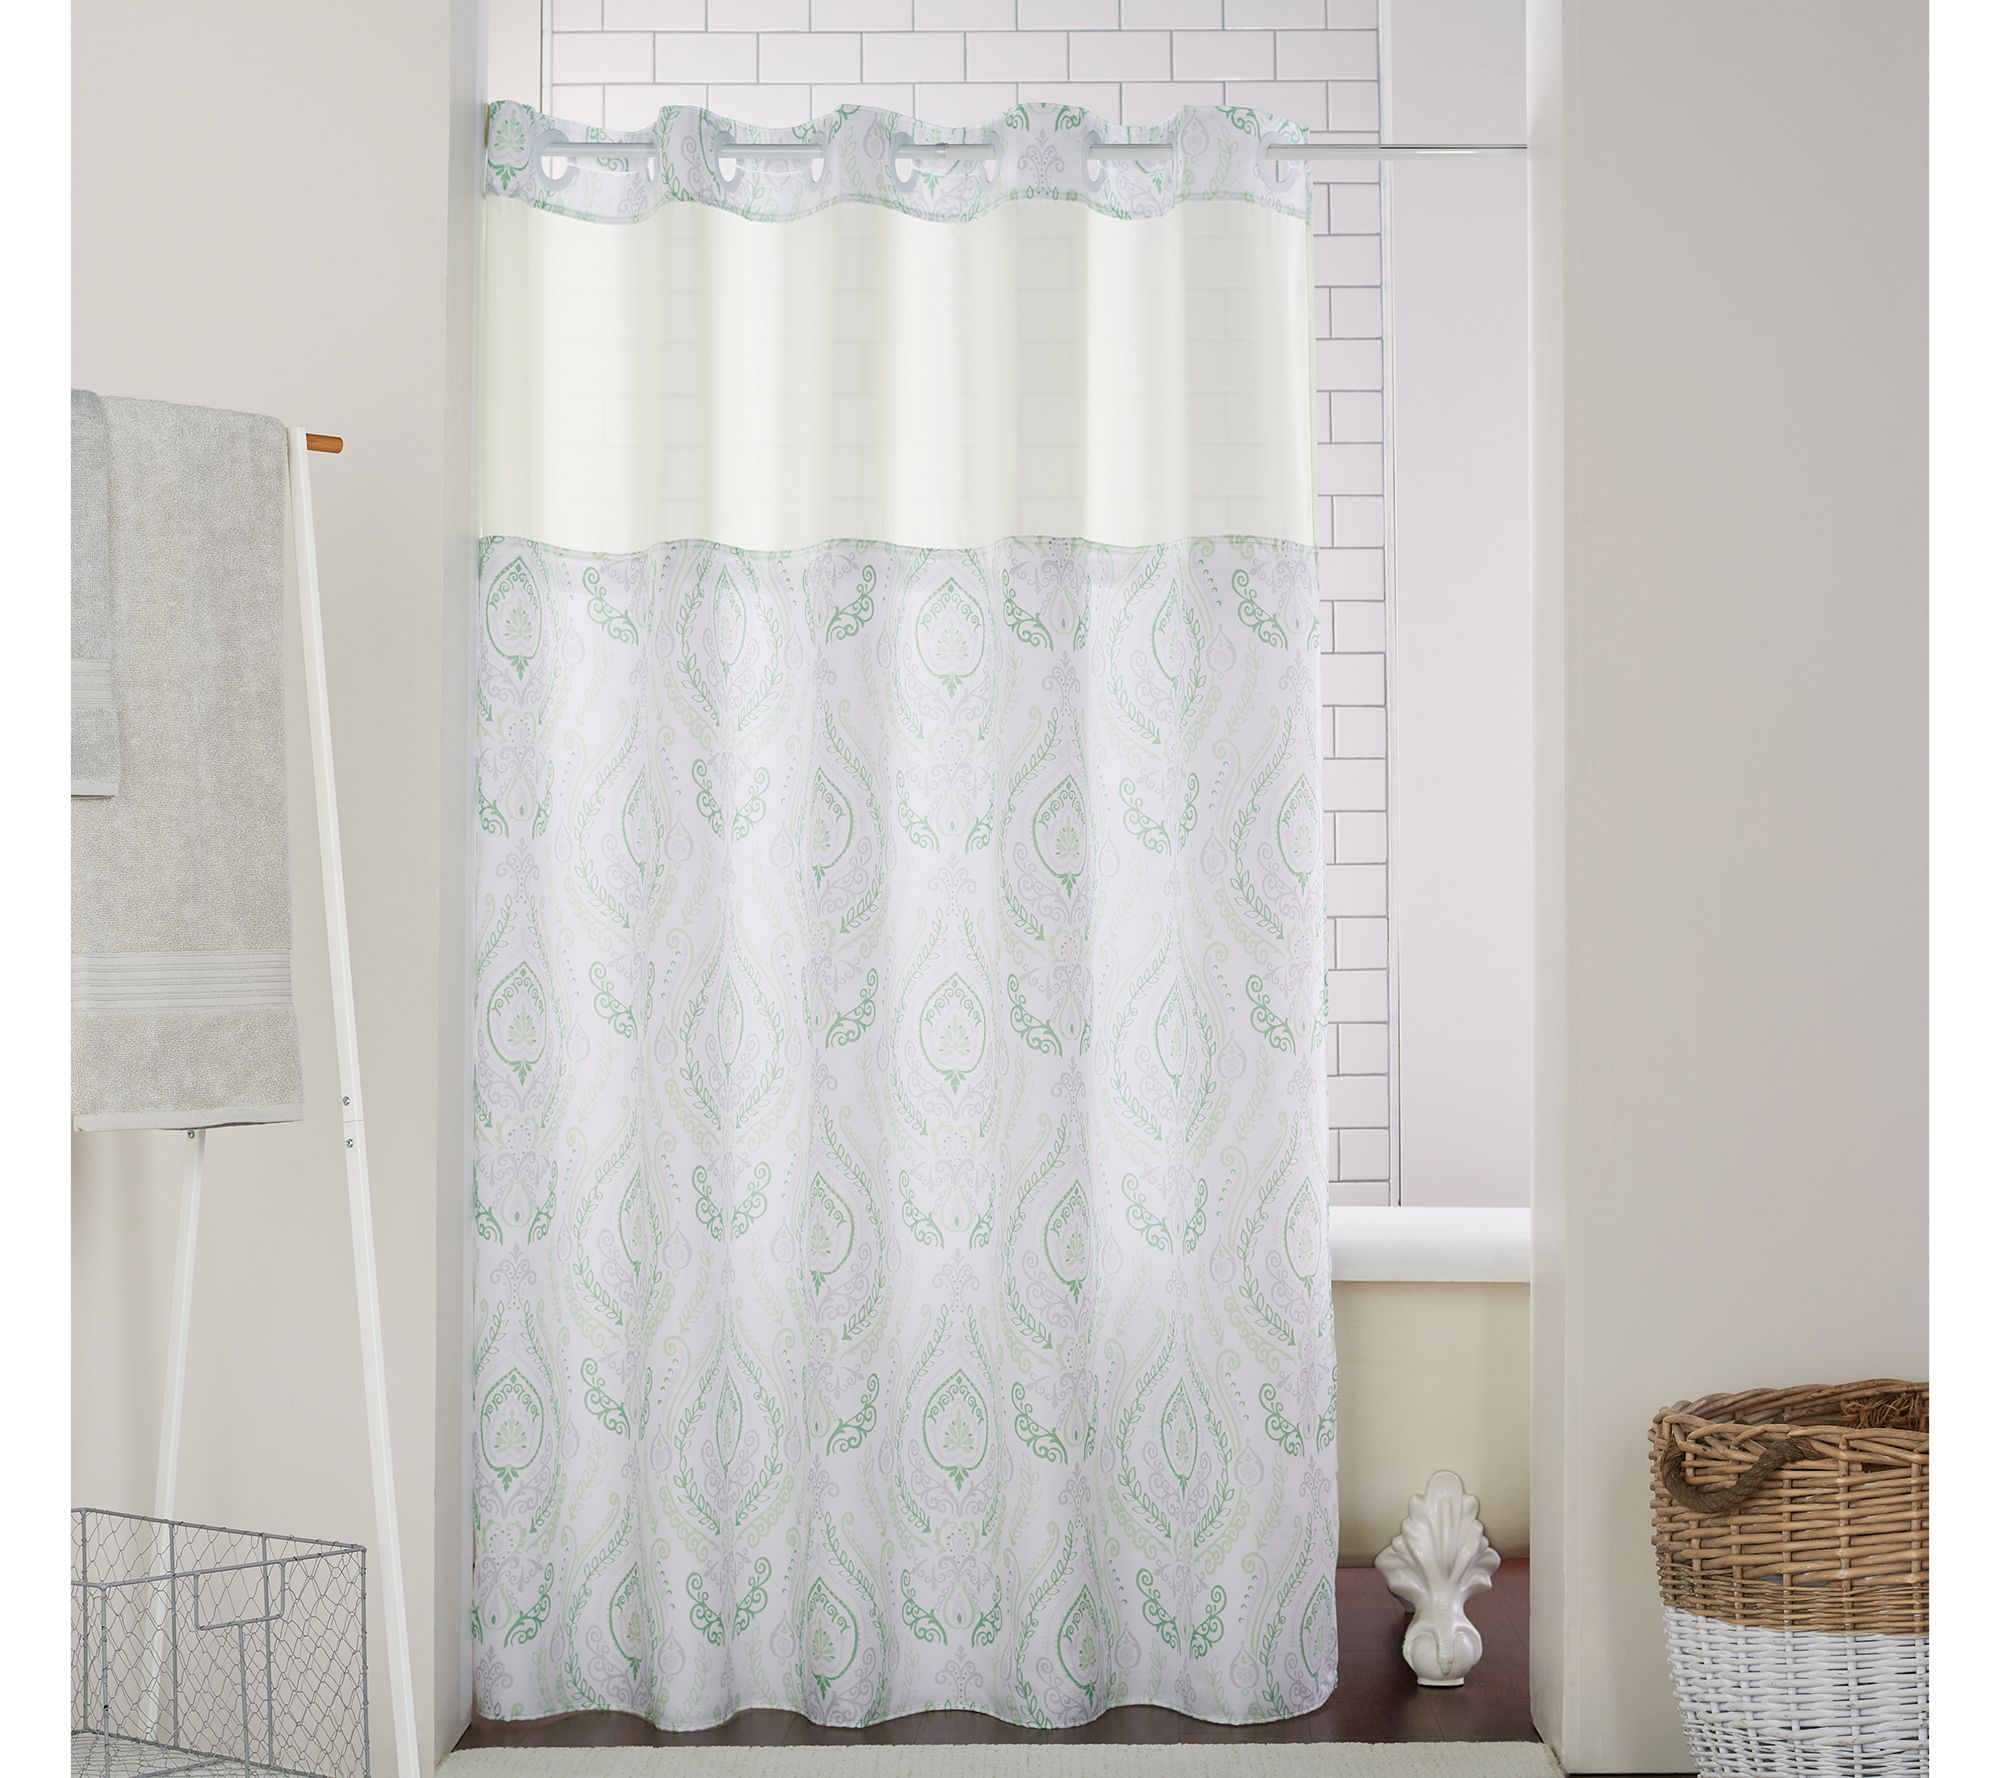 Hookless French Damask Shower Curtain, Hookless Shower Curtain Liner Plastic